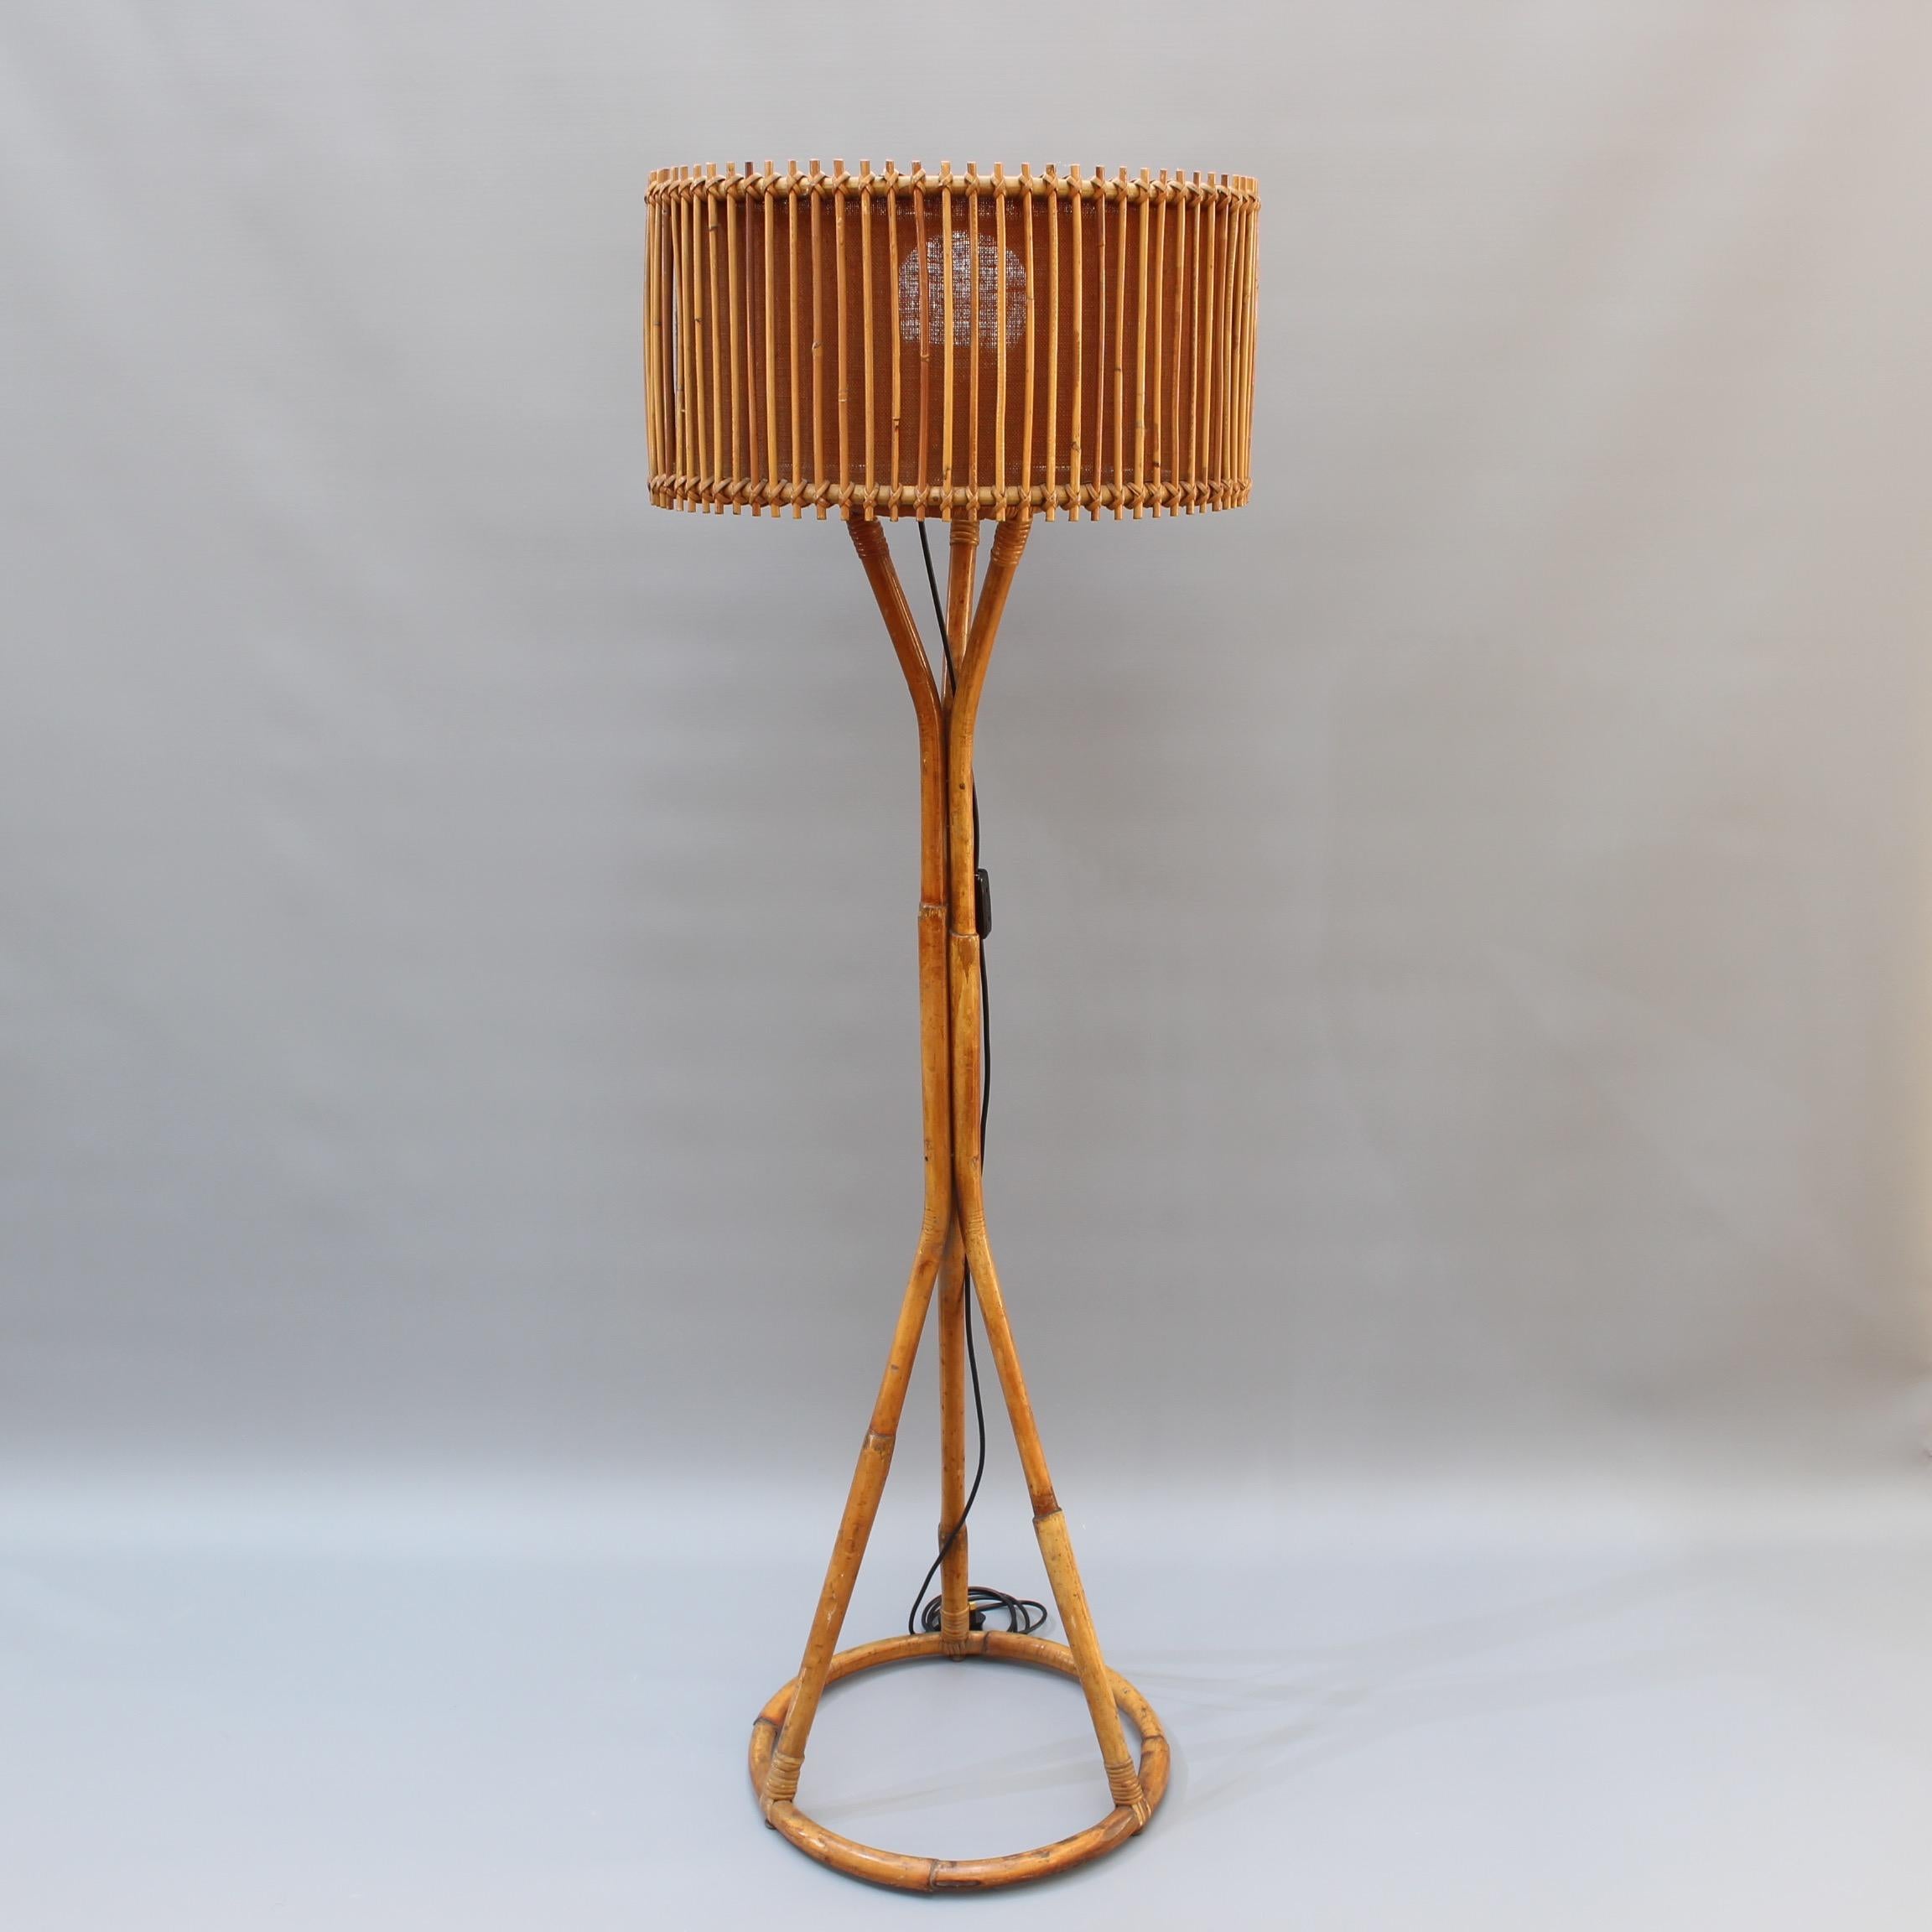 Italian rattan and bamboo floor lamp, circa 1960s. A circular bamboo base provides the stylishly supporting attachment points for three legs which intertwine to form the main structure of this elegantly simple design. The shade is formed by rattan